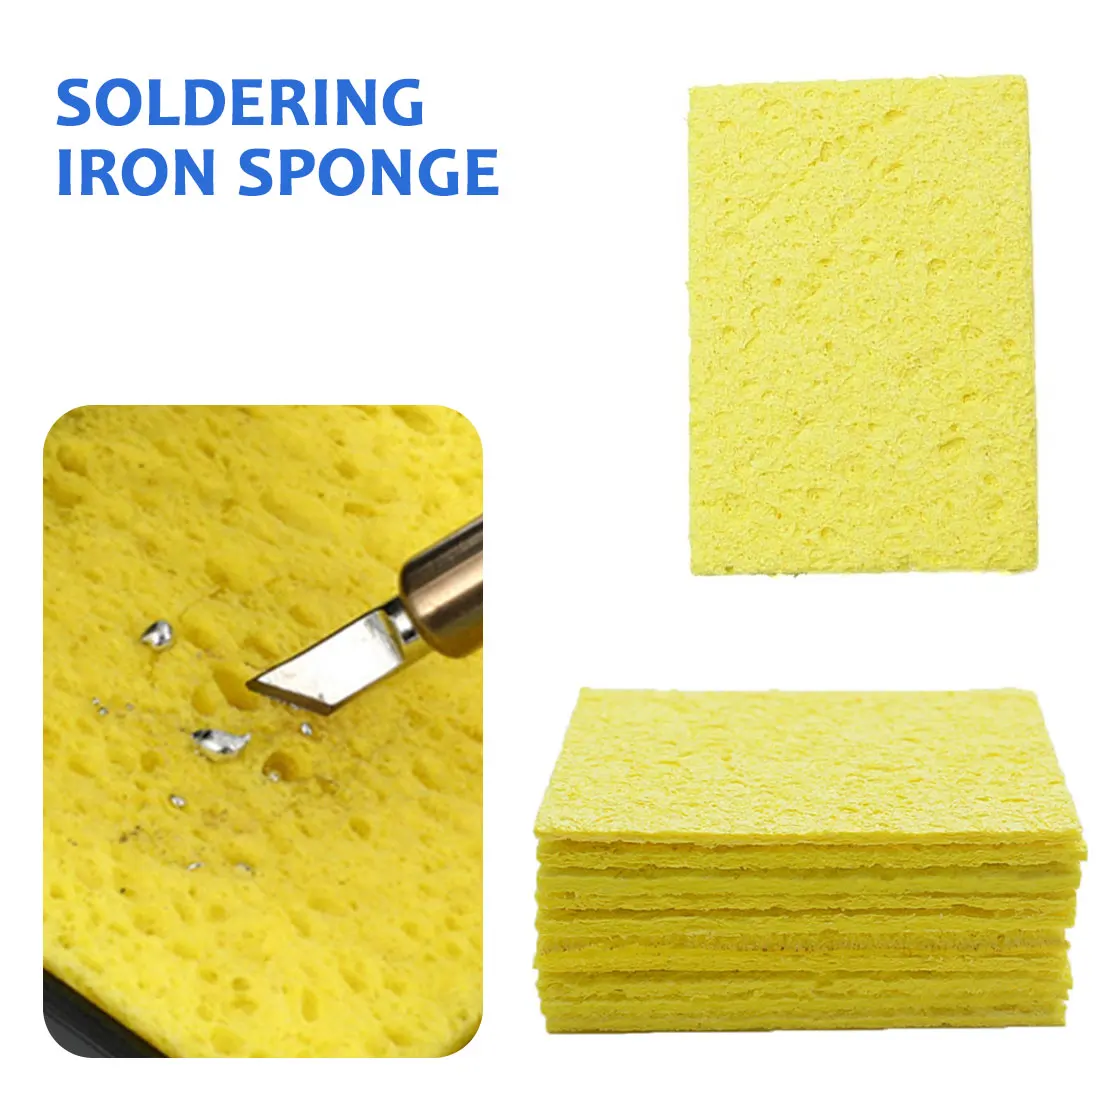 100Pcs Cleaning Sponge Cleaner Yellow Enduring Electric Welding Soldering Iron